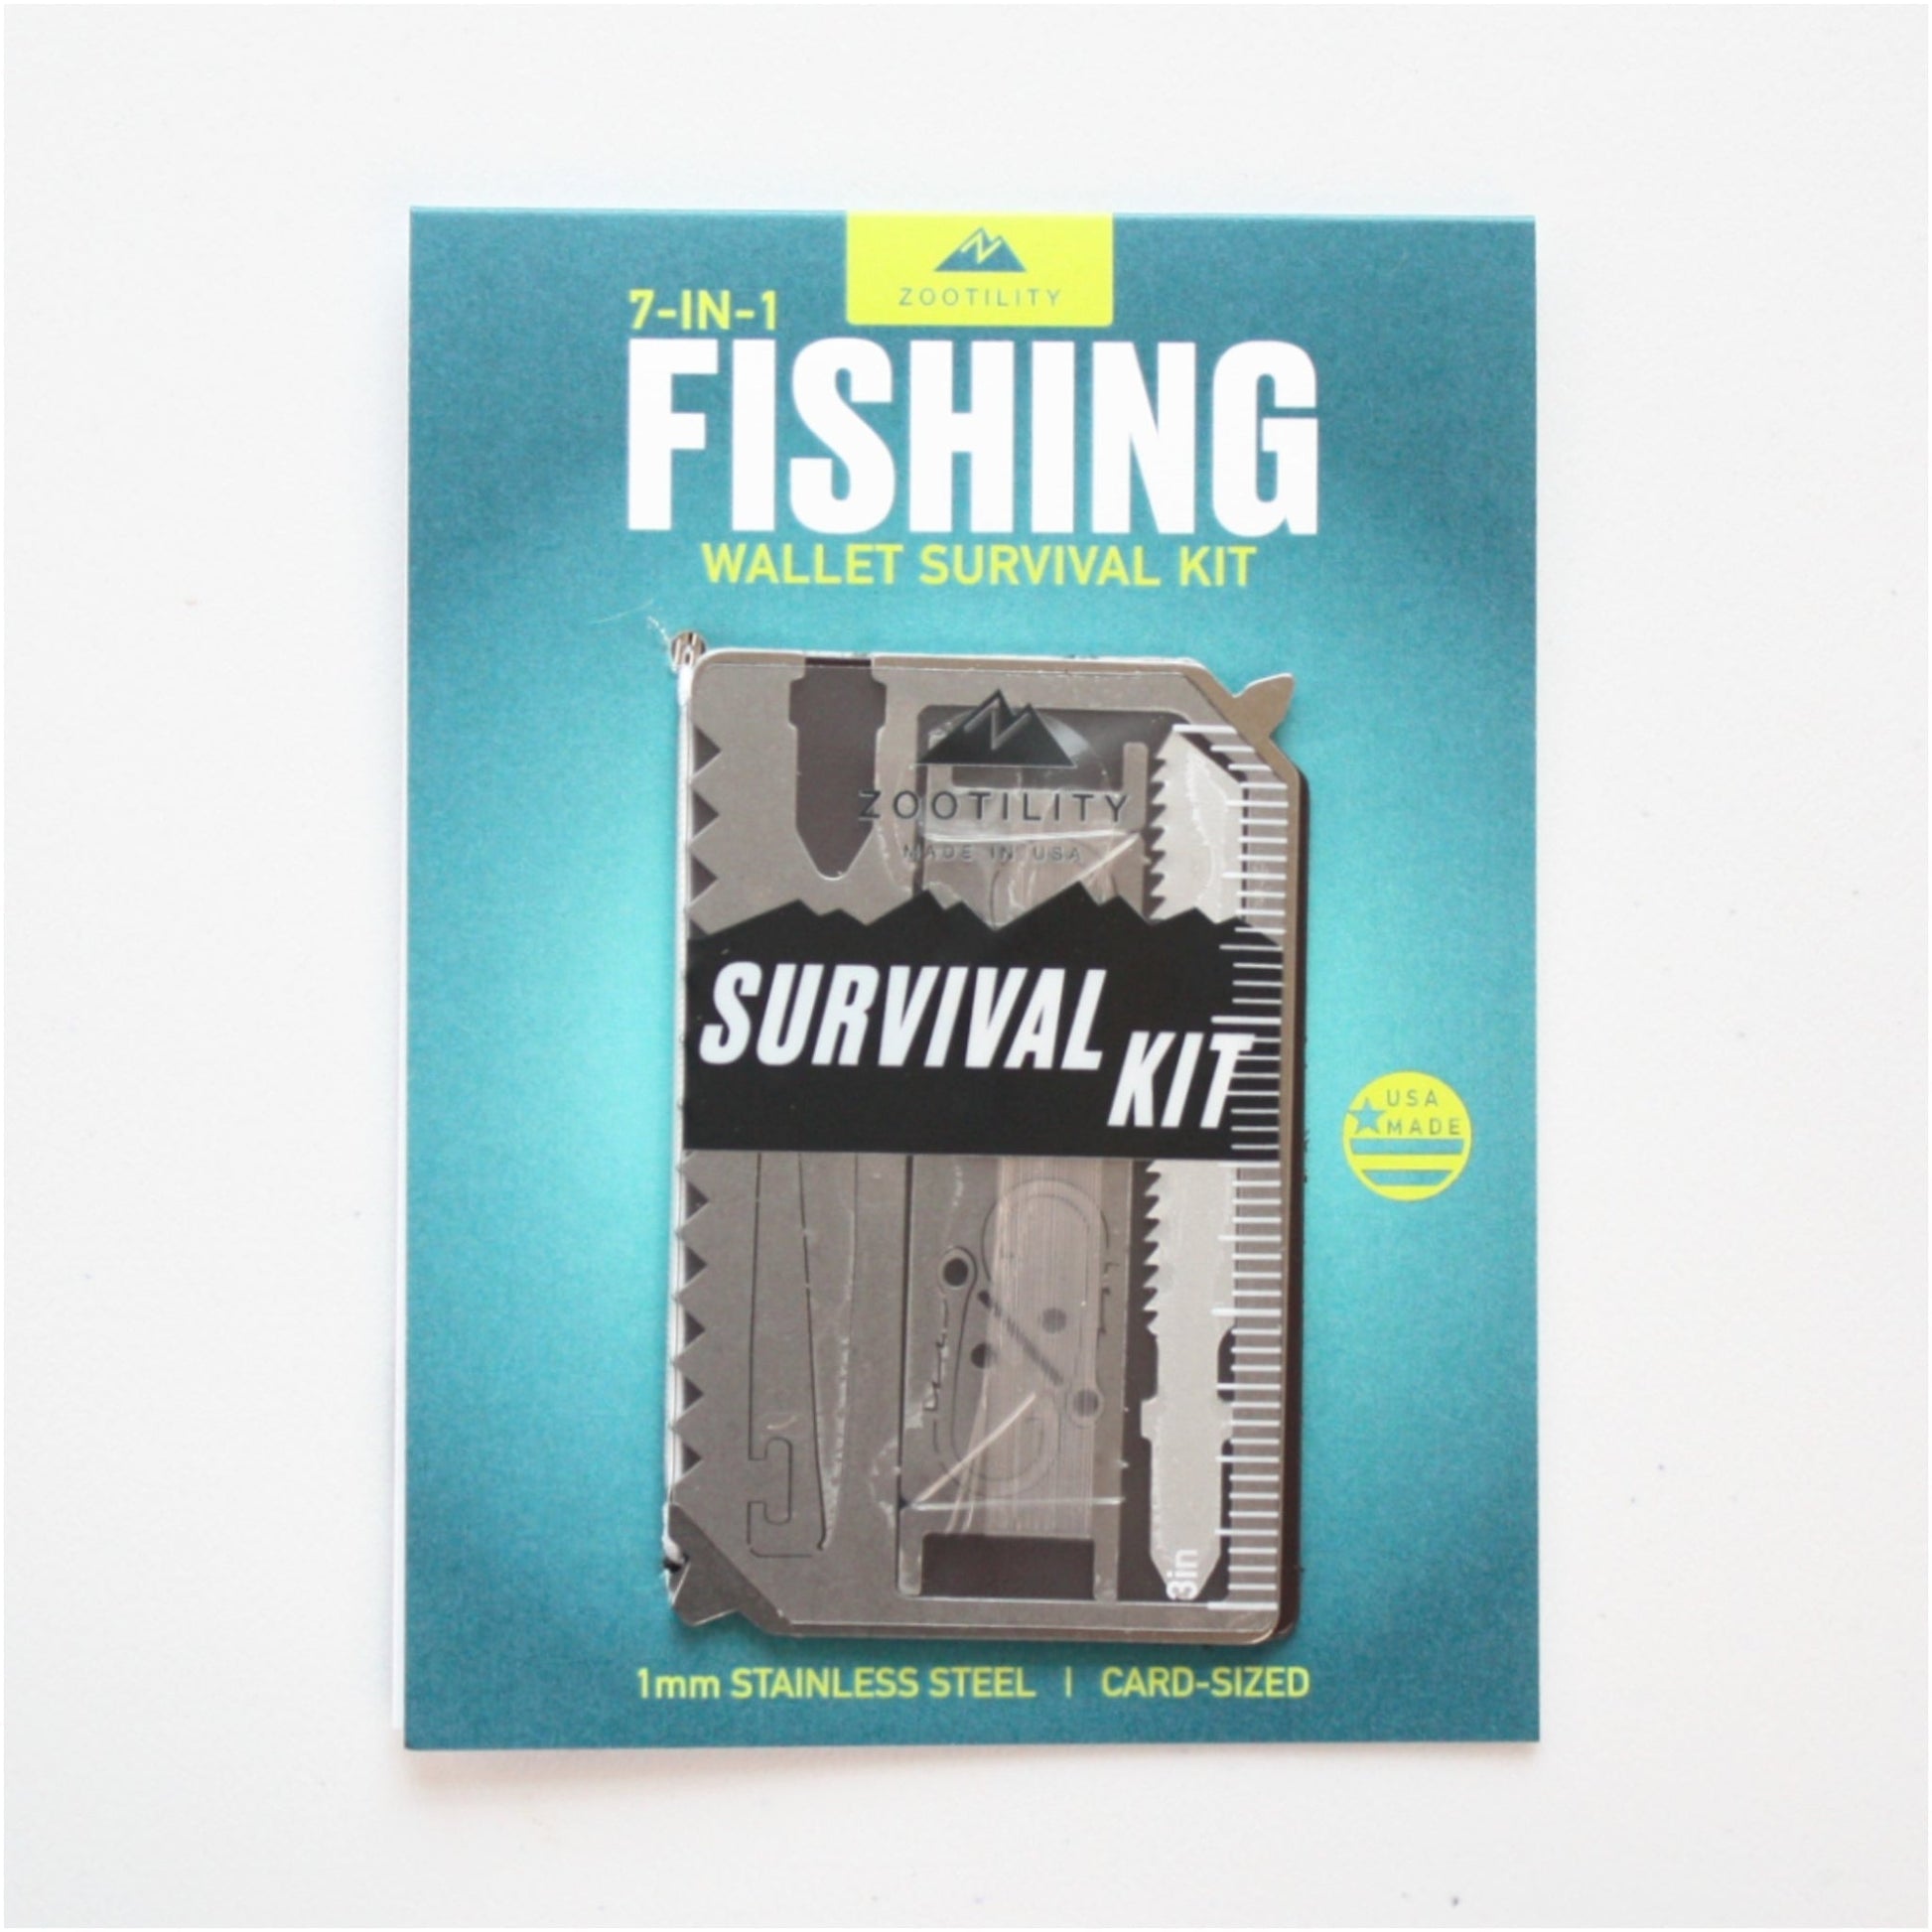 Pocket Fishing Survival Kit - Proudly Made in the USA - LocalWe